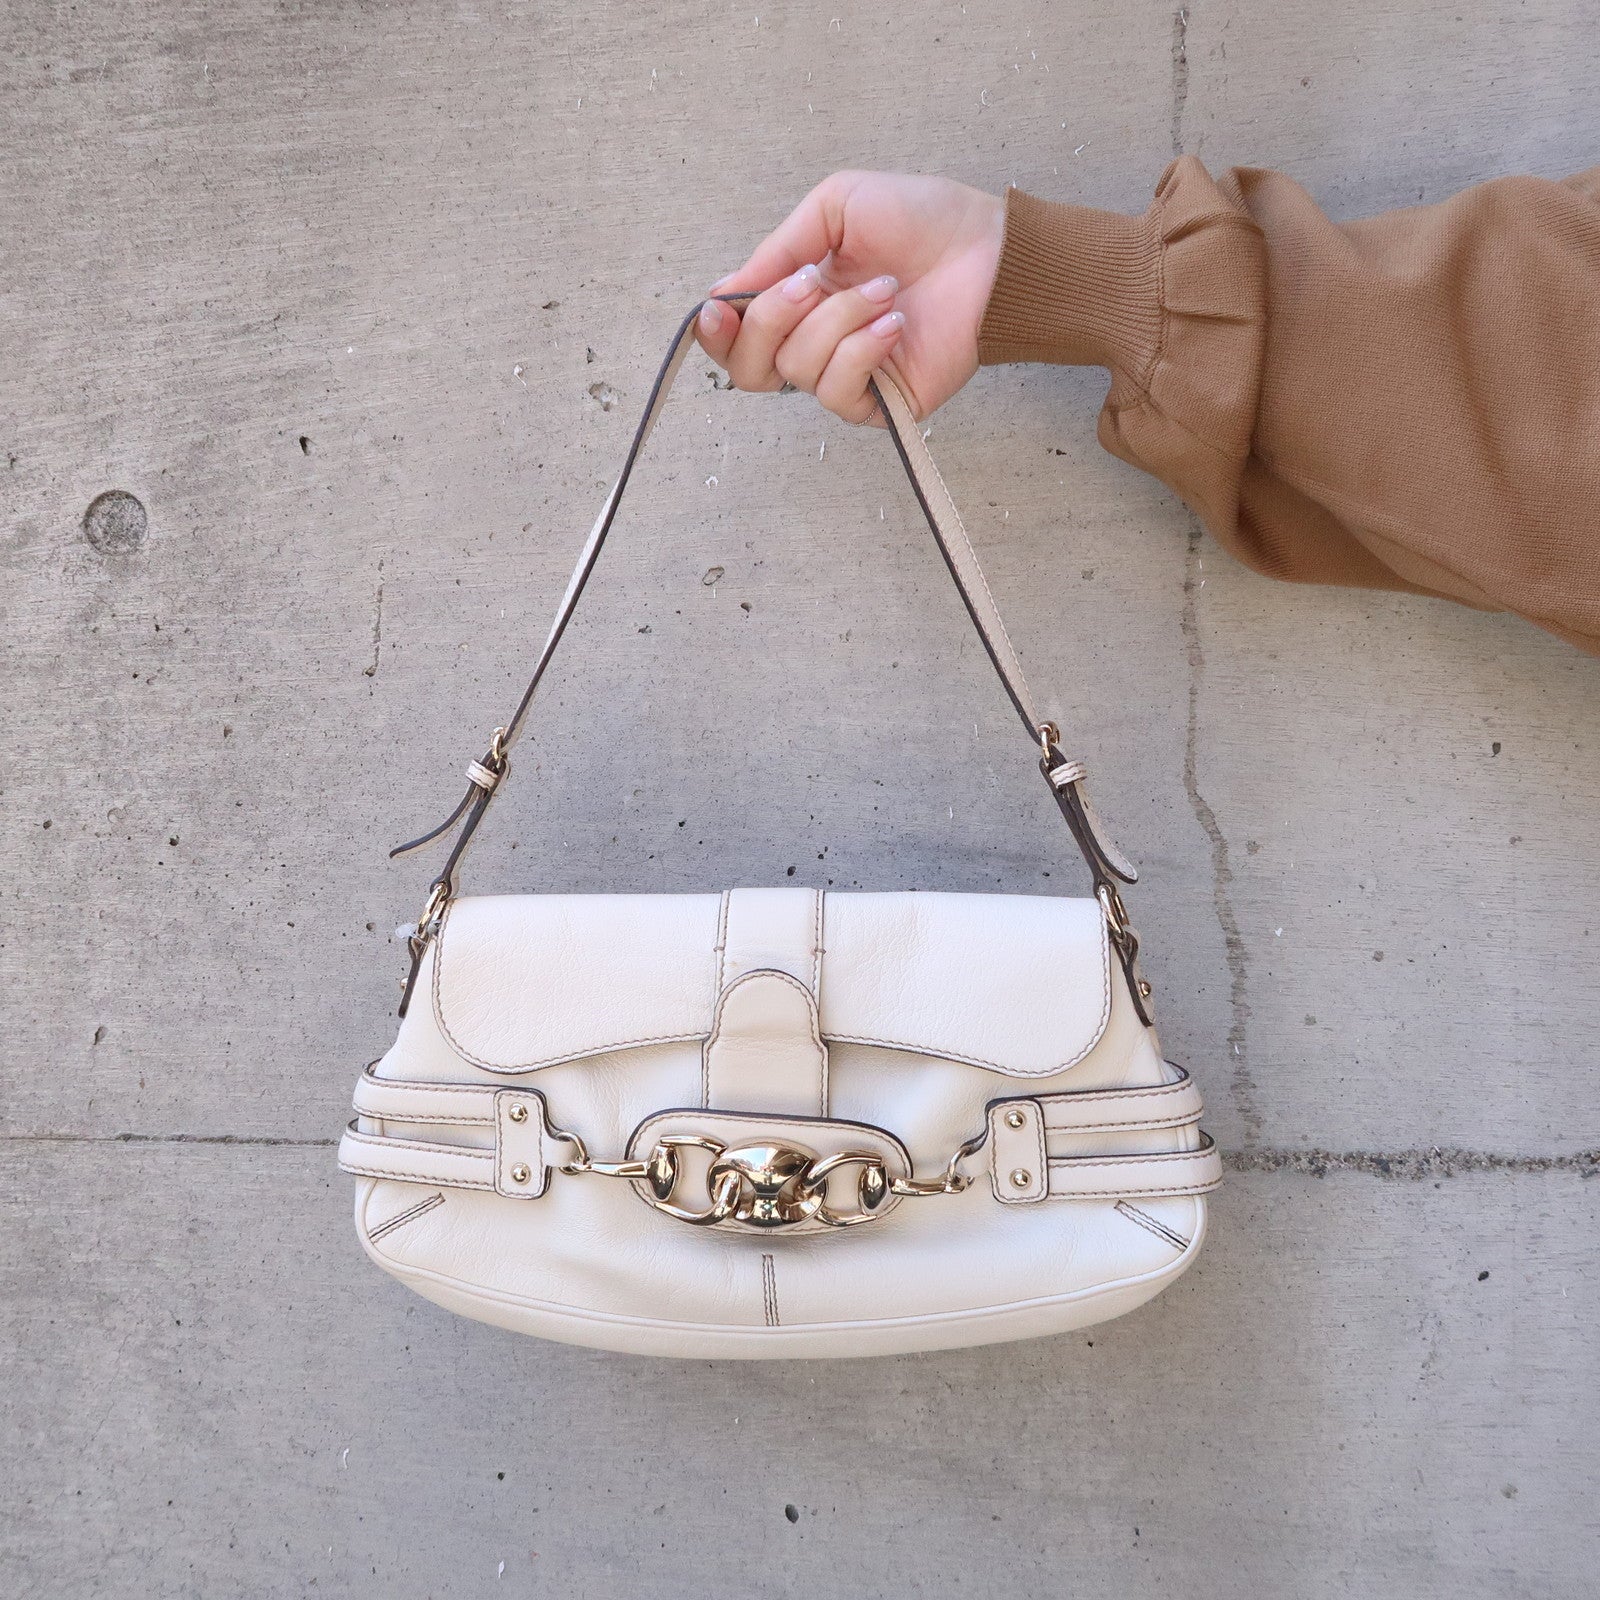 GUCCI-GG-Canvas-Leather-Hand-Bag-Purse-Beige-Ivory-190393 – dct-ep_vintage  luxury Store